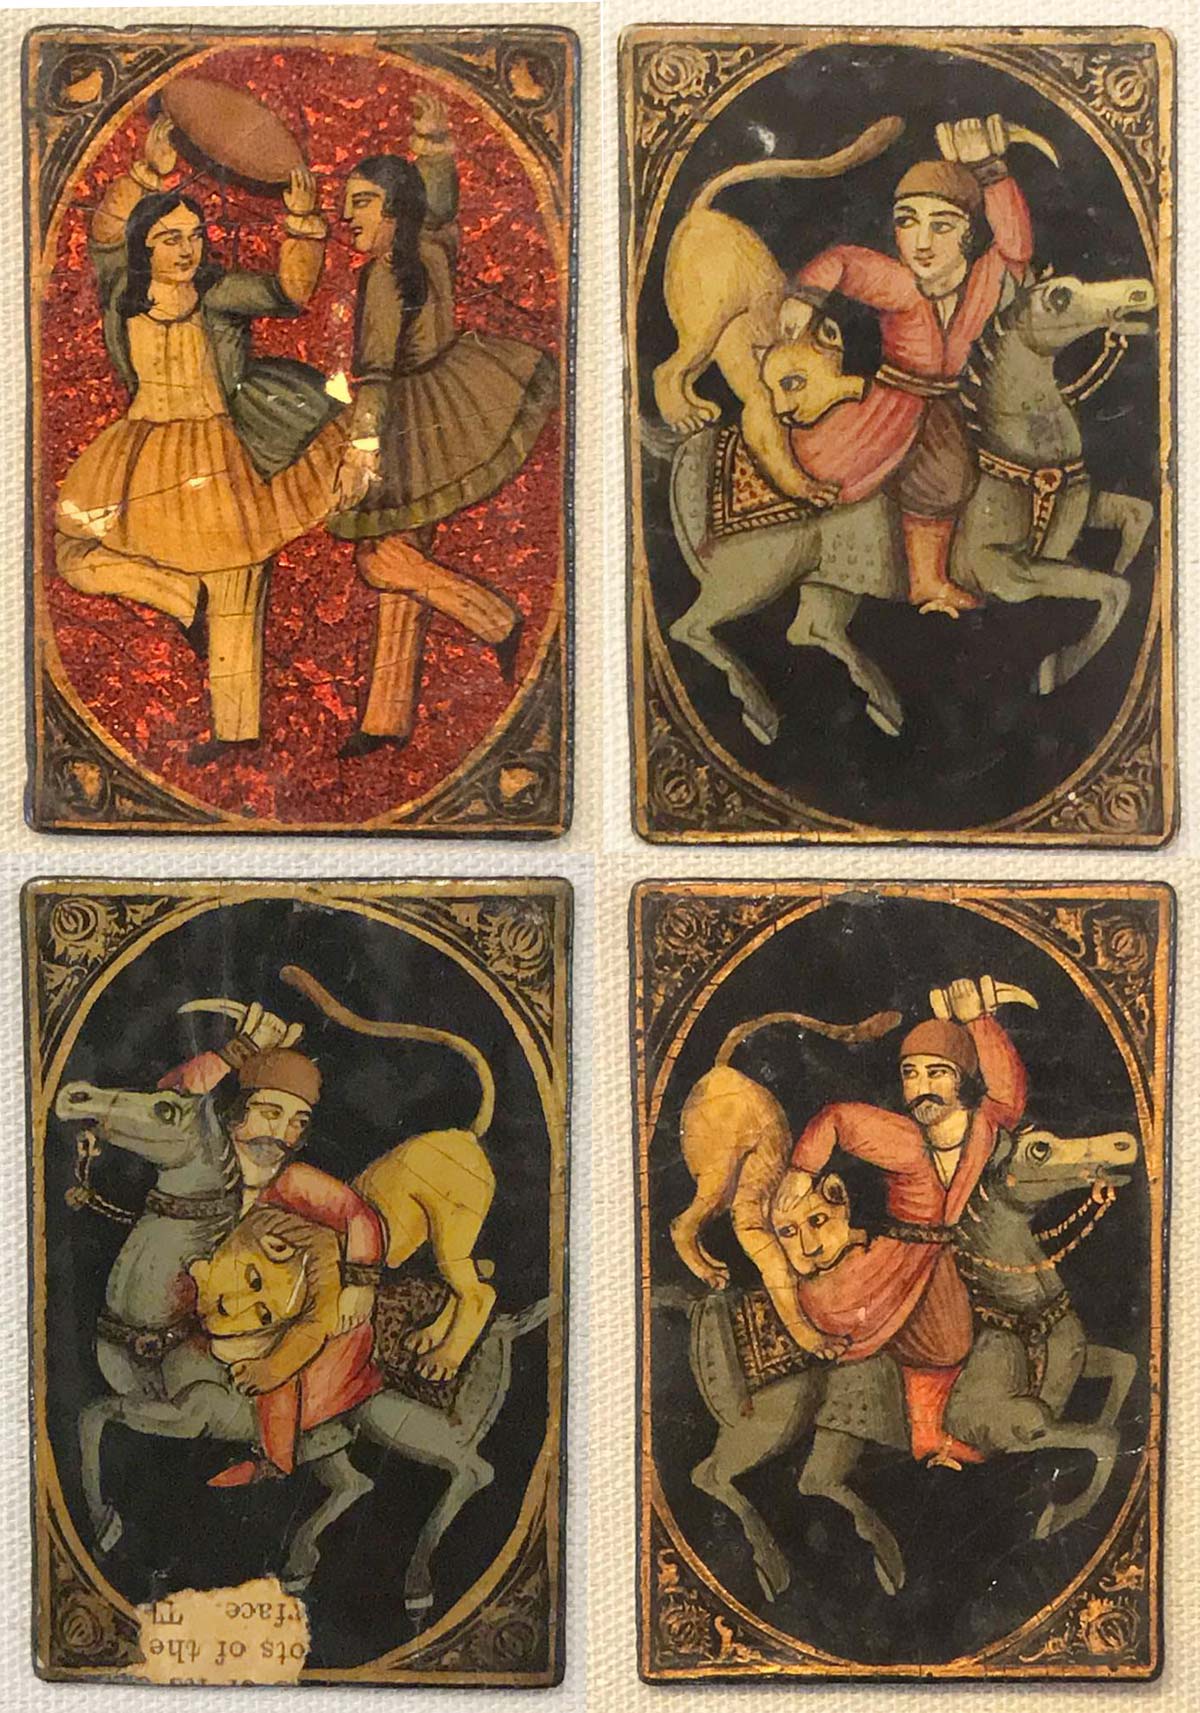 Qajar Dynasty playing cards, Iran, 19th century, lacquer on laminated paper